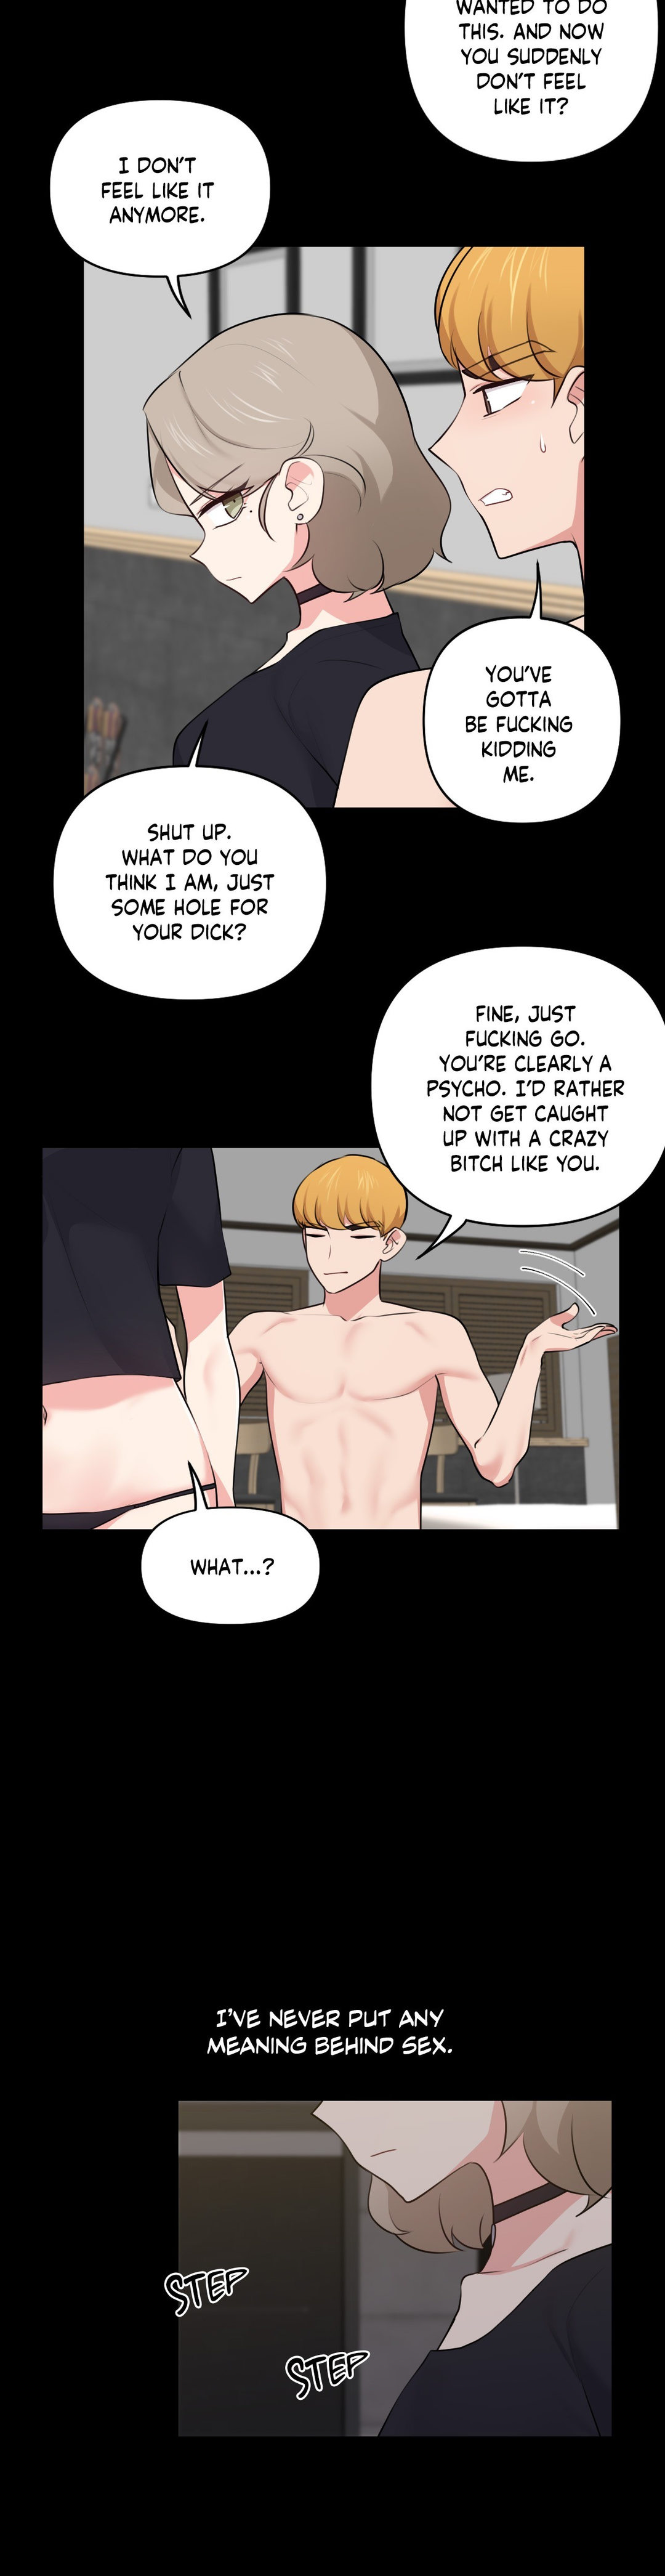 Friends or F-Buddies - Chapter 41 Page 2